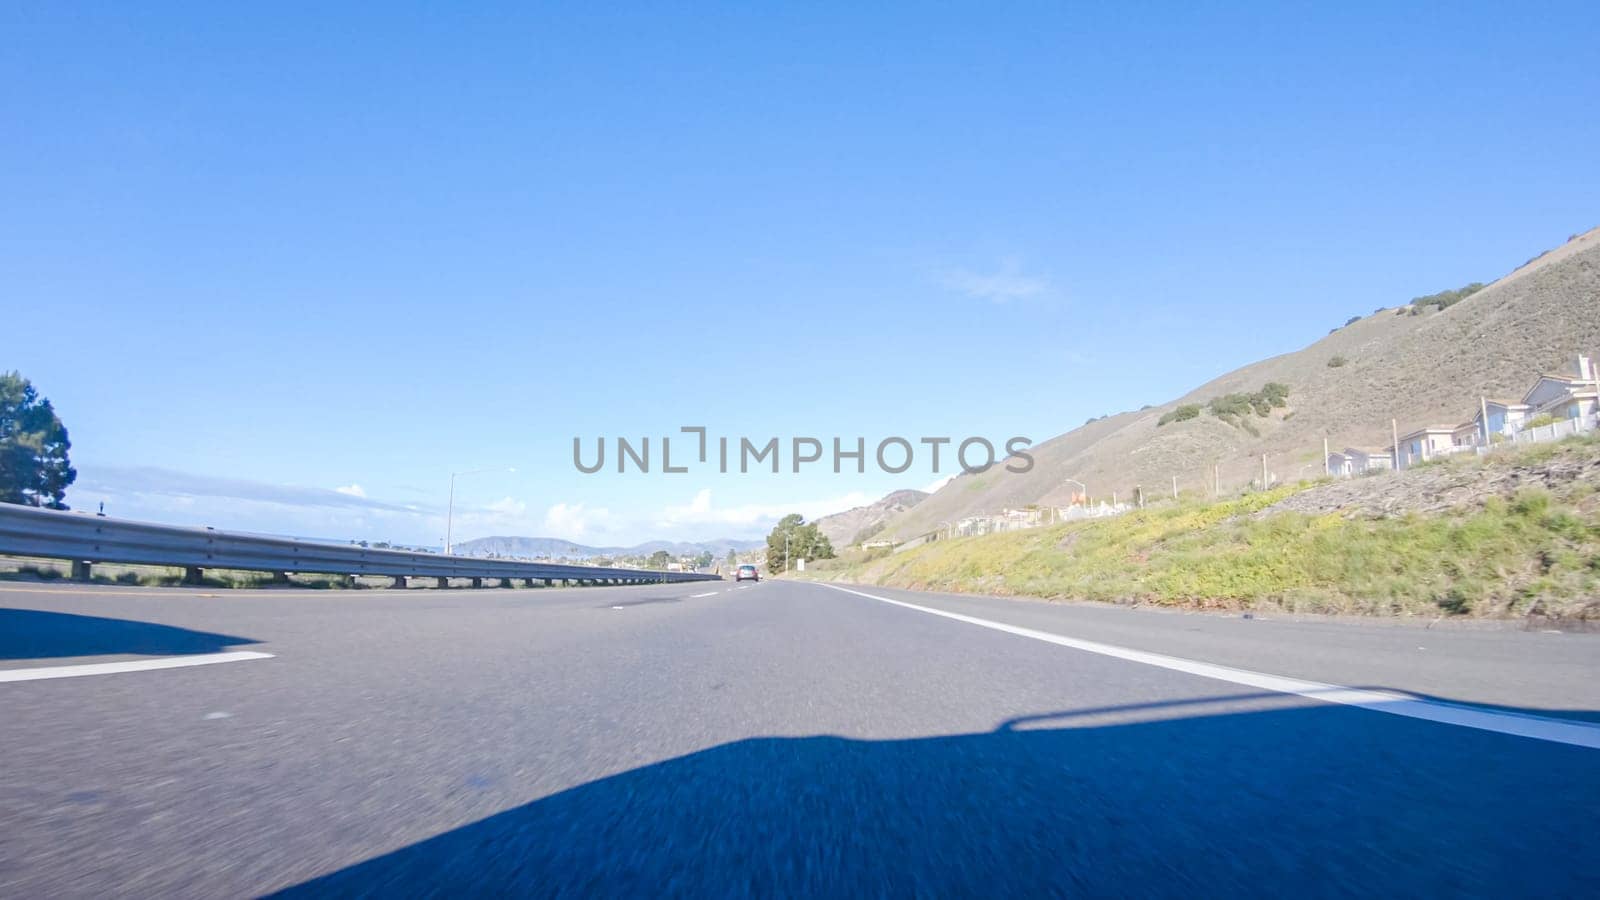 On a crisp winter day, a car cruises along the iconic Highway 1 near San Luis Obispo, California. The surrounding landscape is brownish and subdued, with rolling hills and patches of coastal vegetation flanking the winding road.